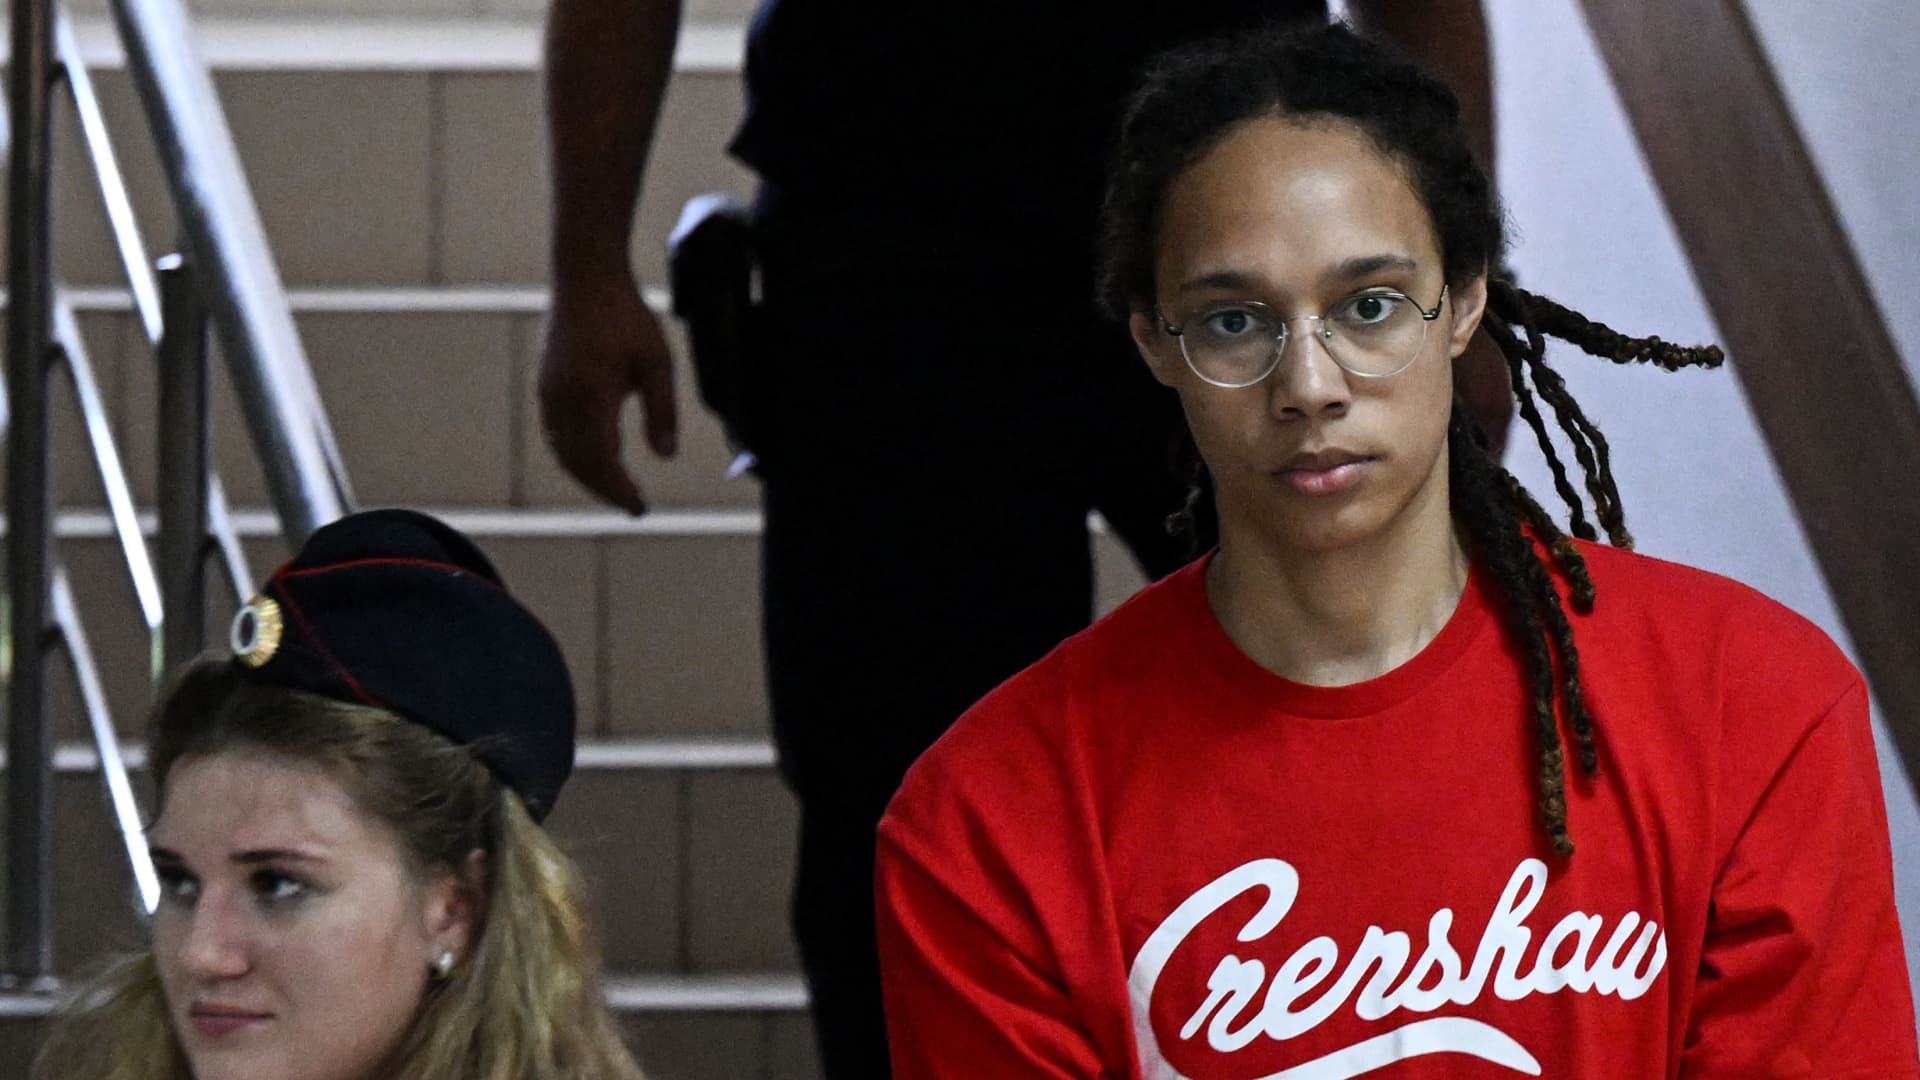 WNBA star Brittney Griner pleads guilty to drug charges in Russian court